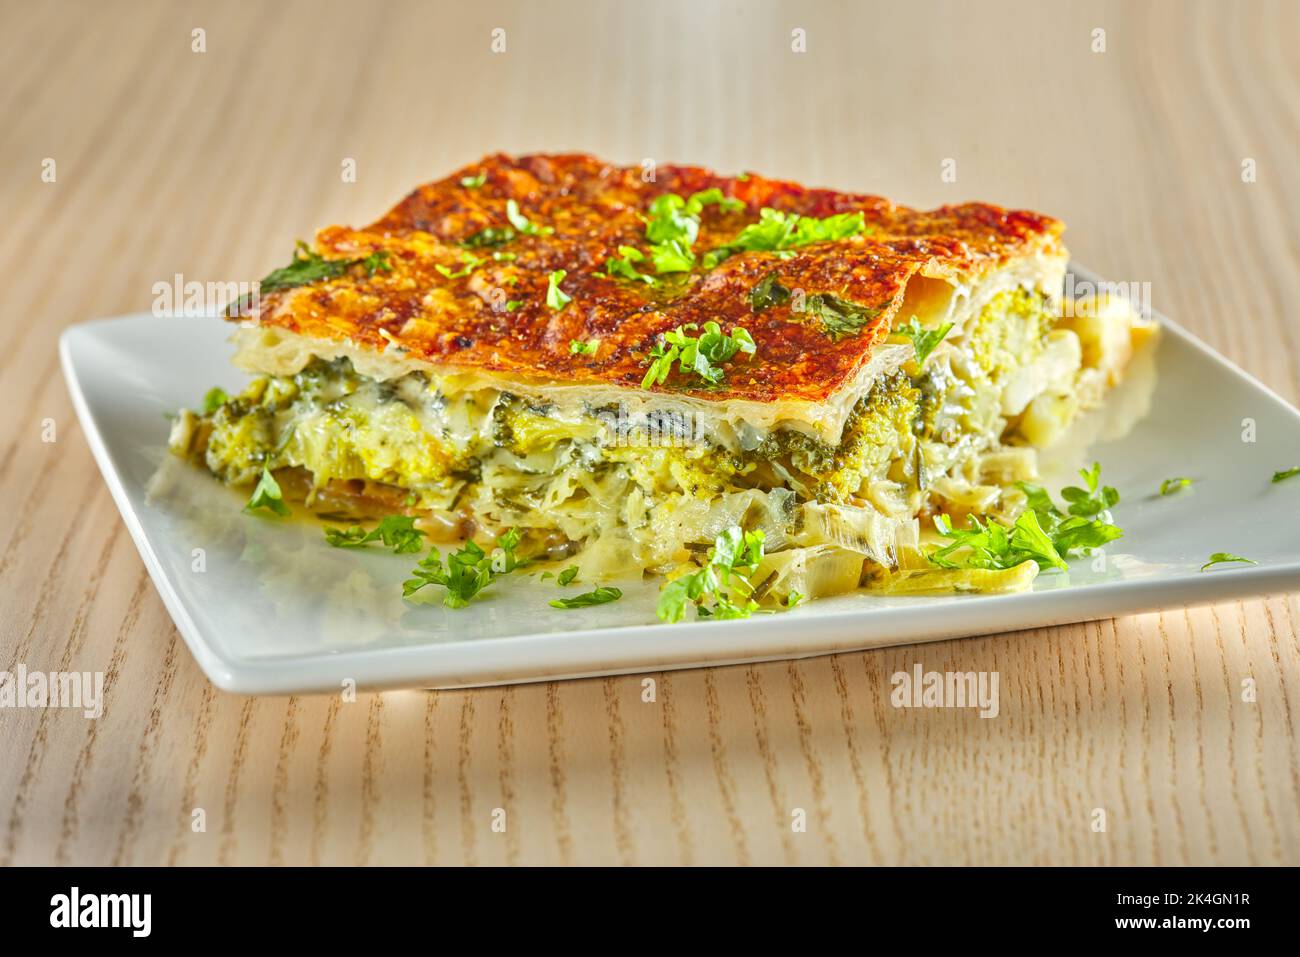 Pie made from broccoli, cheese, cream  and leek - close up view Stock Photo